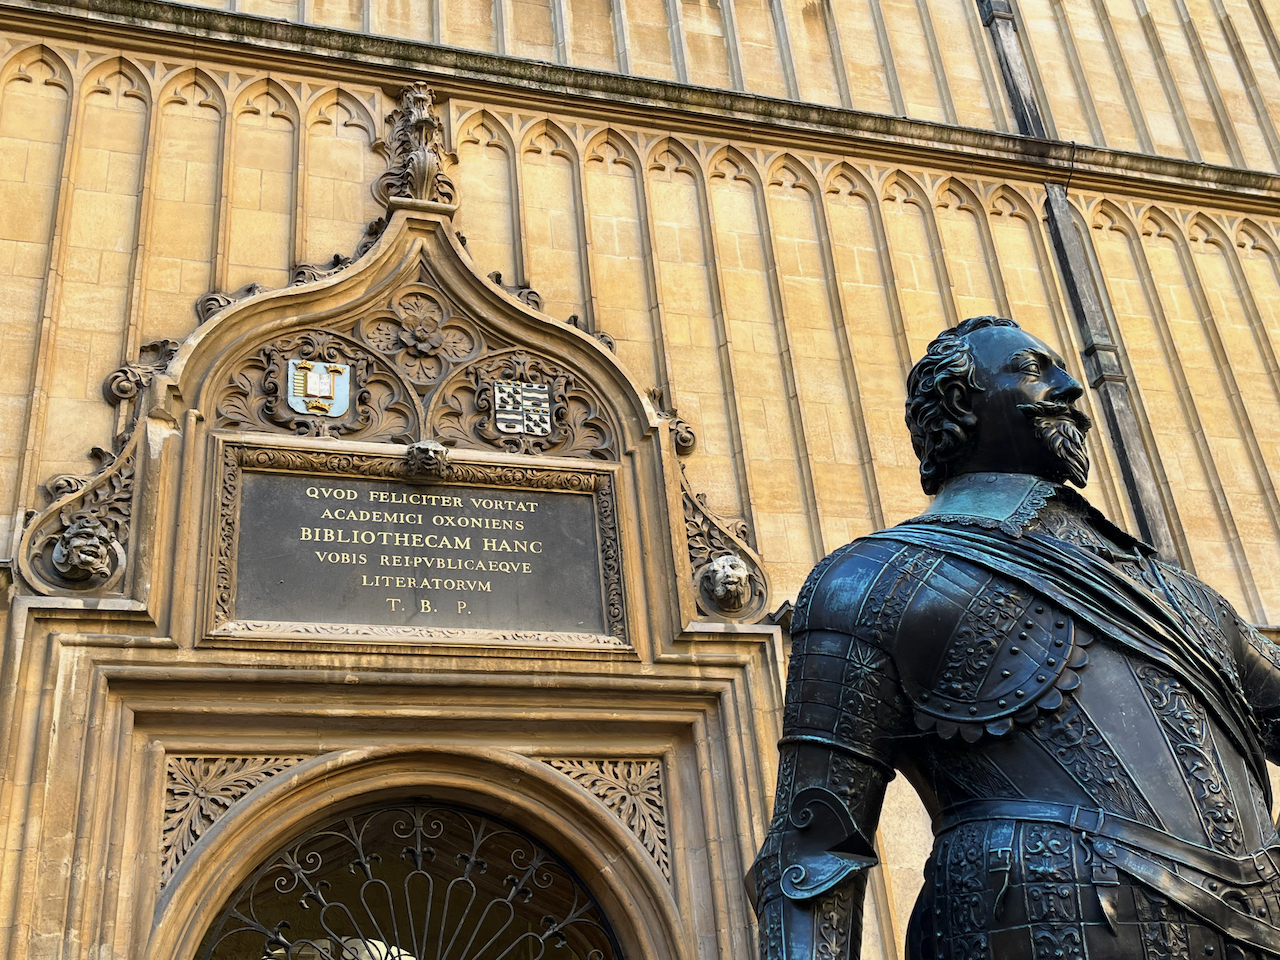 Latin text, decorative shields and ornate carving above the entrance to the Divinity School, with the statue of the Earl of Pembroke in front of it.